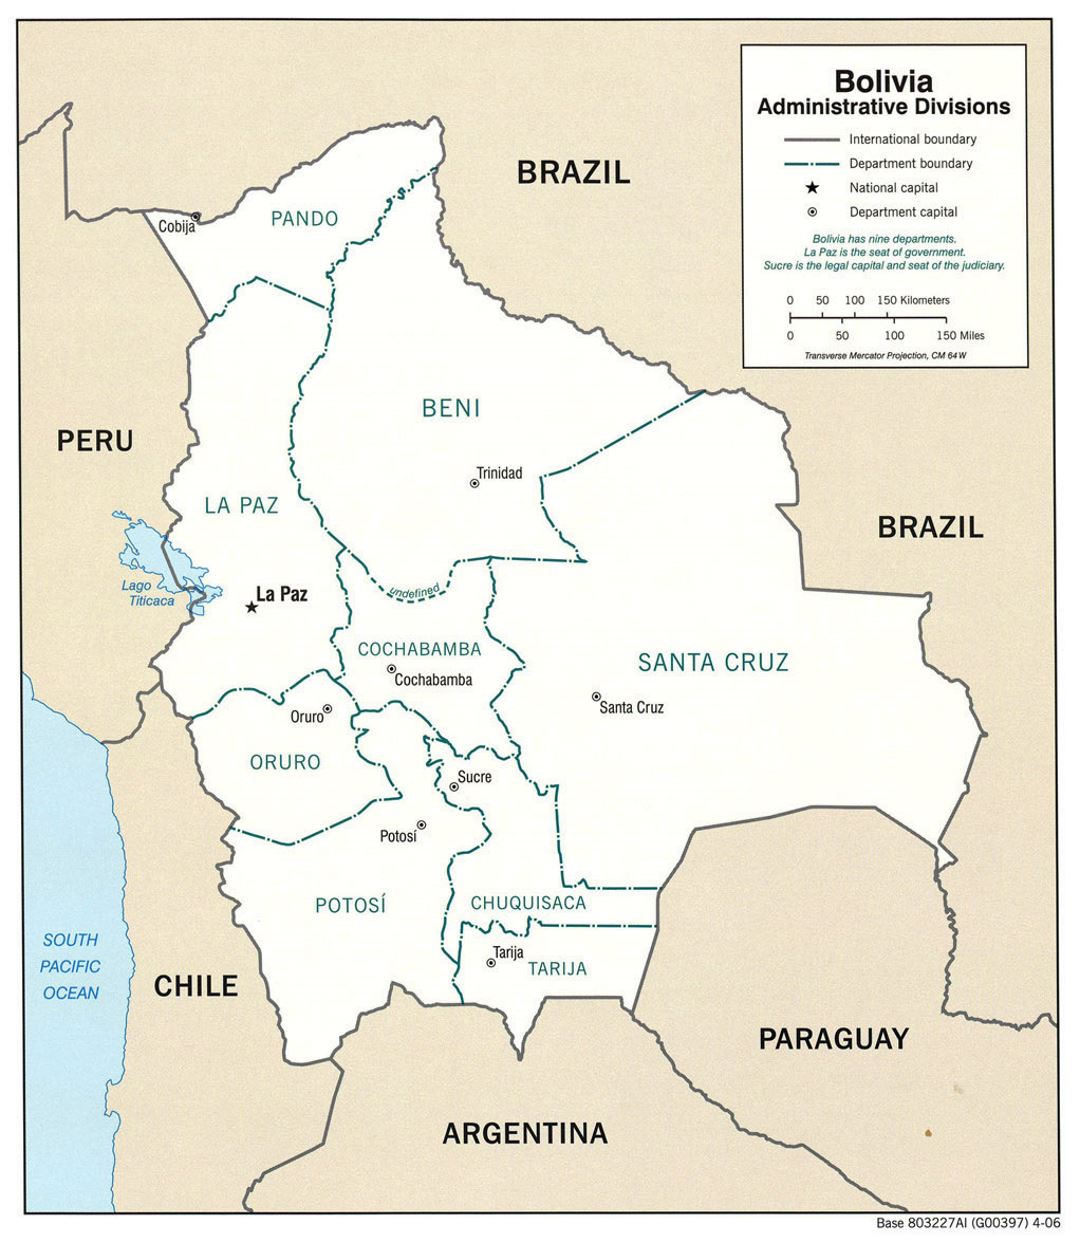 Large administrative divisions map of Bolivia with major cities - 2006